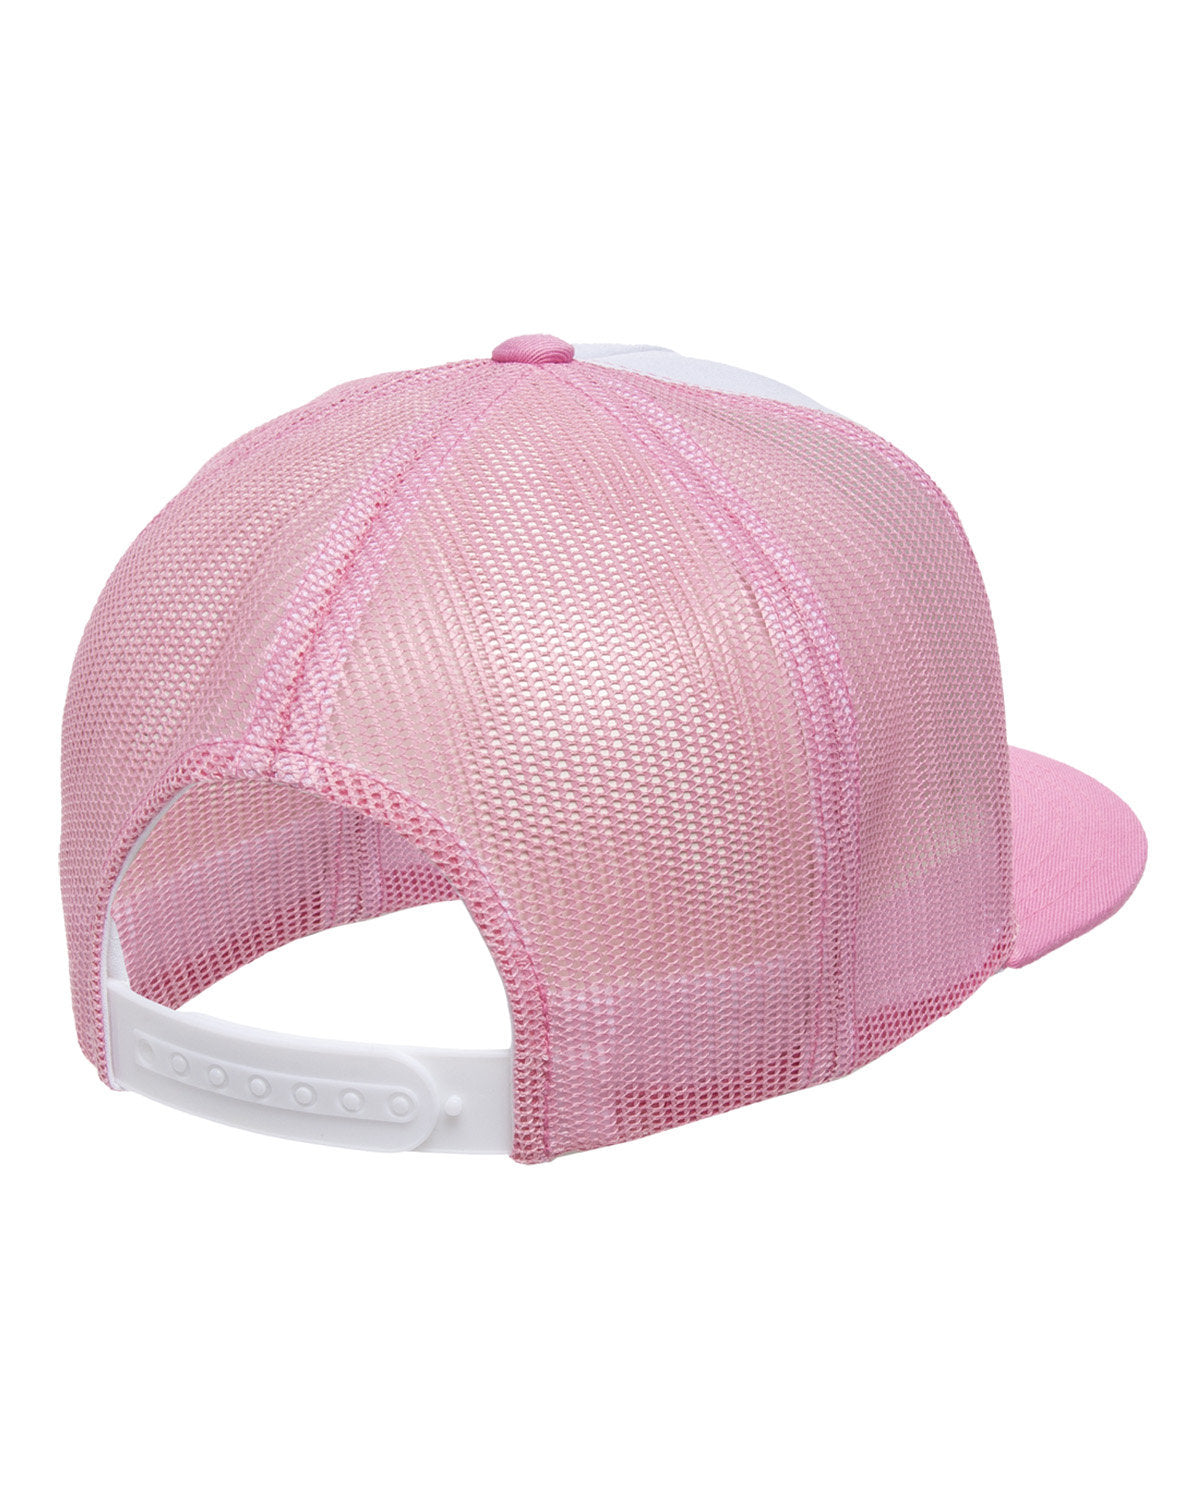 Yupoong Classic Customized Trucker With White Front Panel Caps, Pink/ White/ Pink